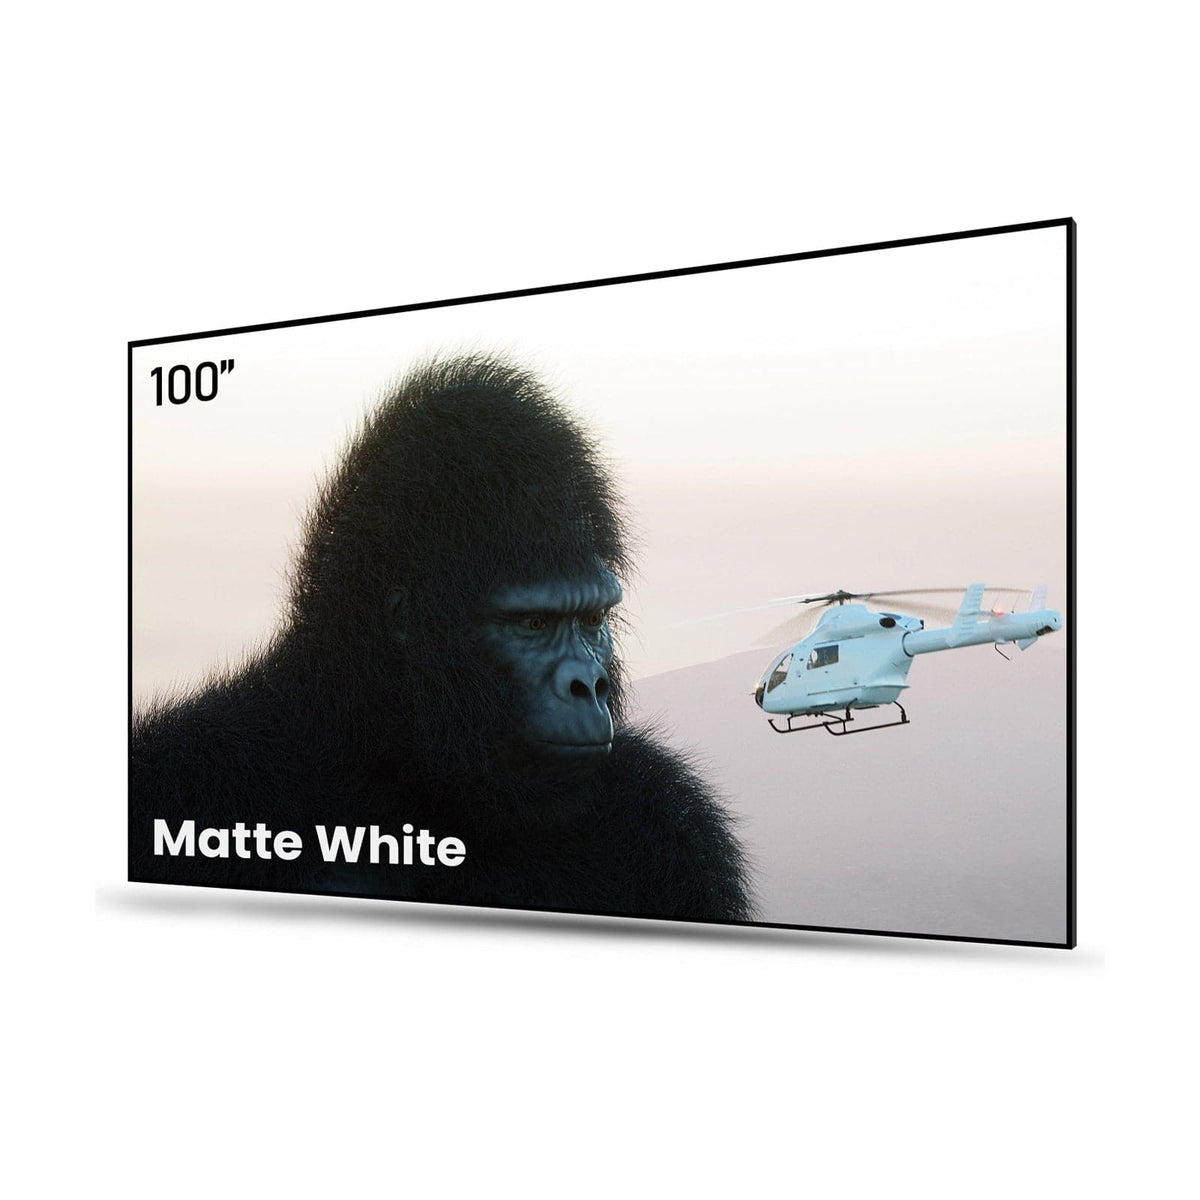 100" Matte White Screen displaying an image of a gorilla and a helicopter, perfect for each projector setups.